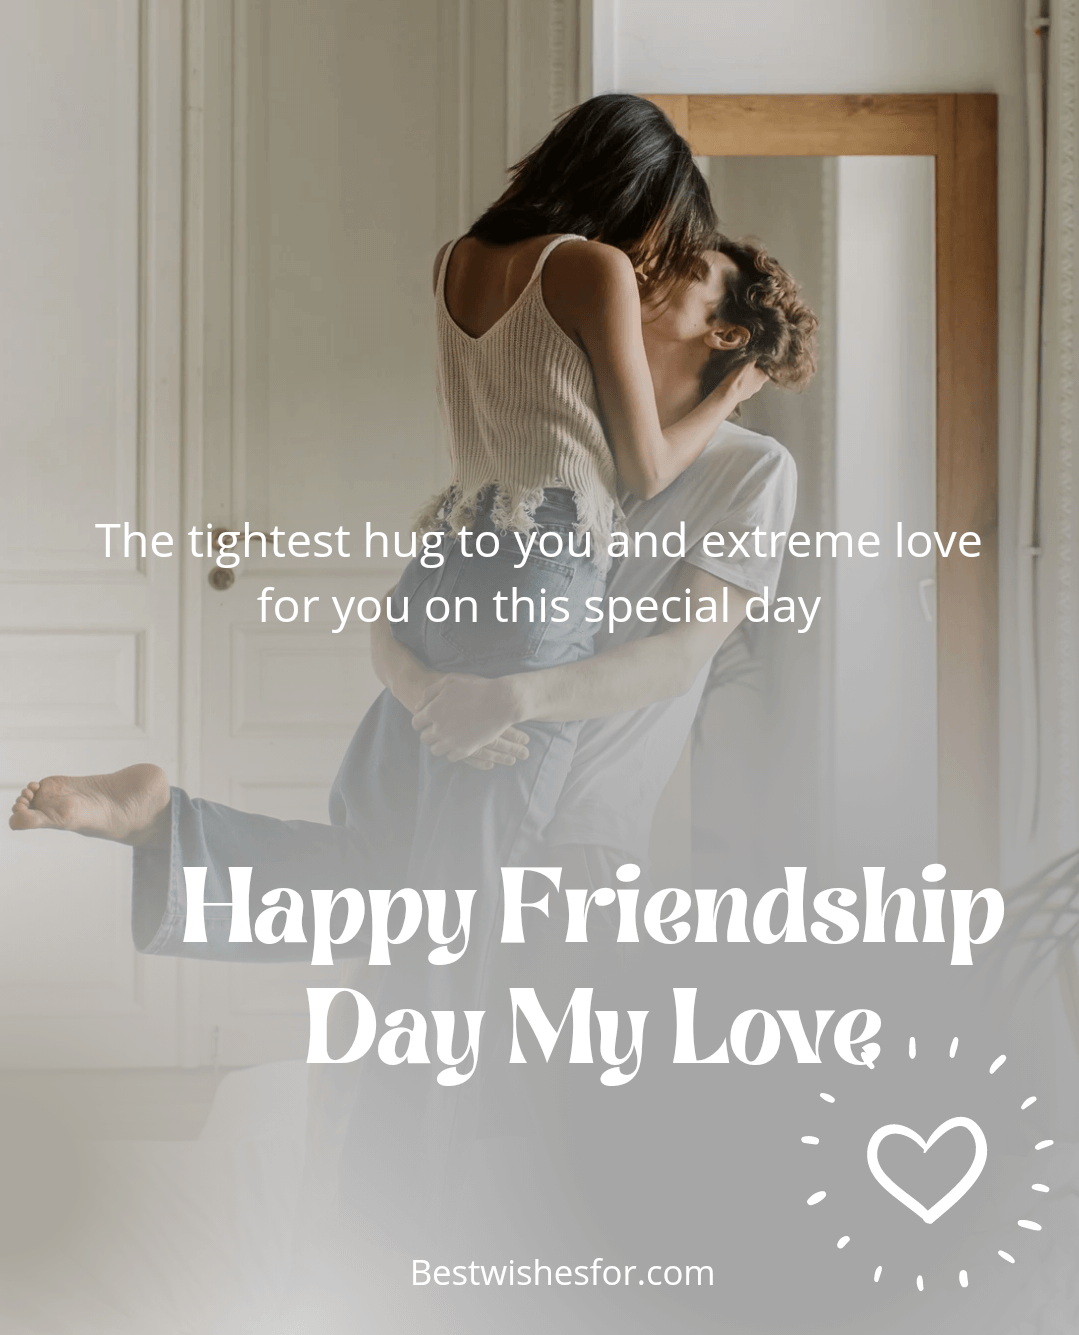 50+ Friendship Day Wishes, Quotes & Images: 2023 - FNP